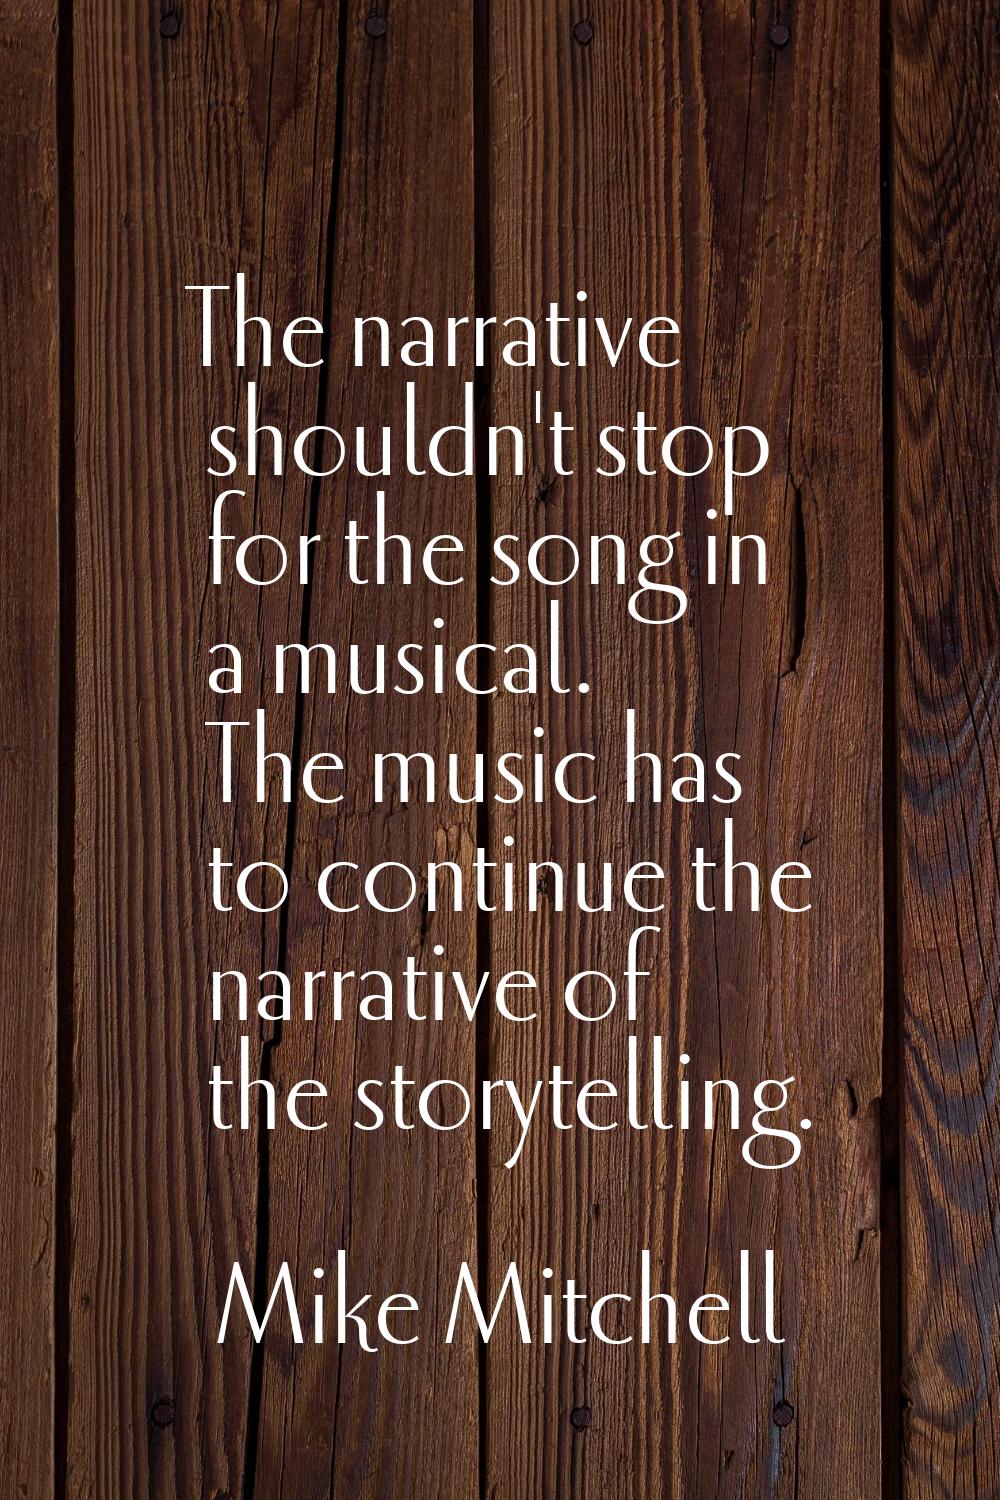 The narrative shouldn't stop for the song in a musical. The music has to continue the narrative of 